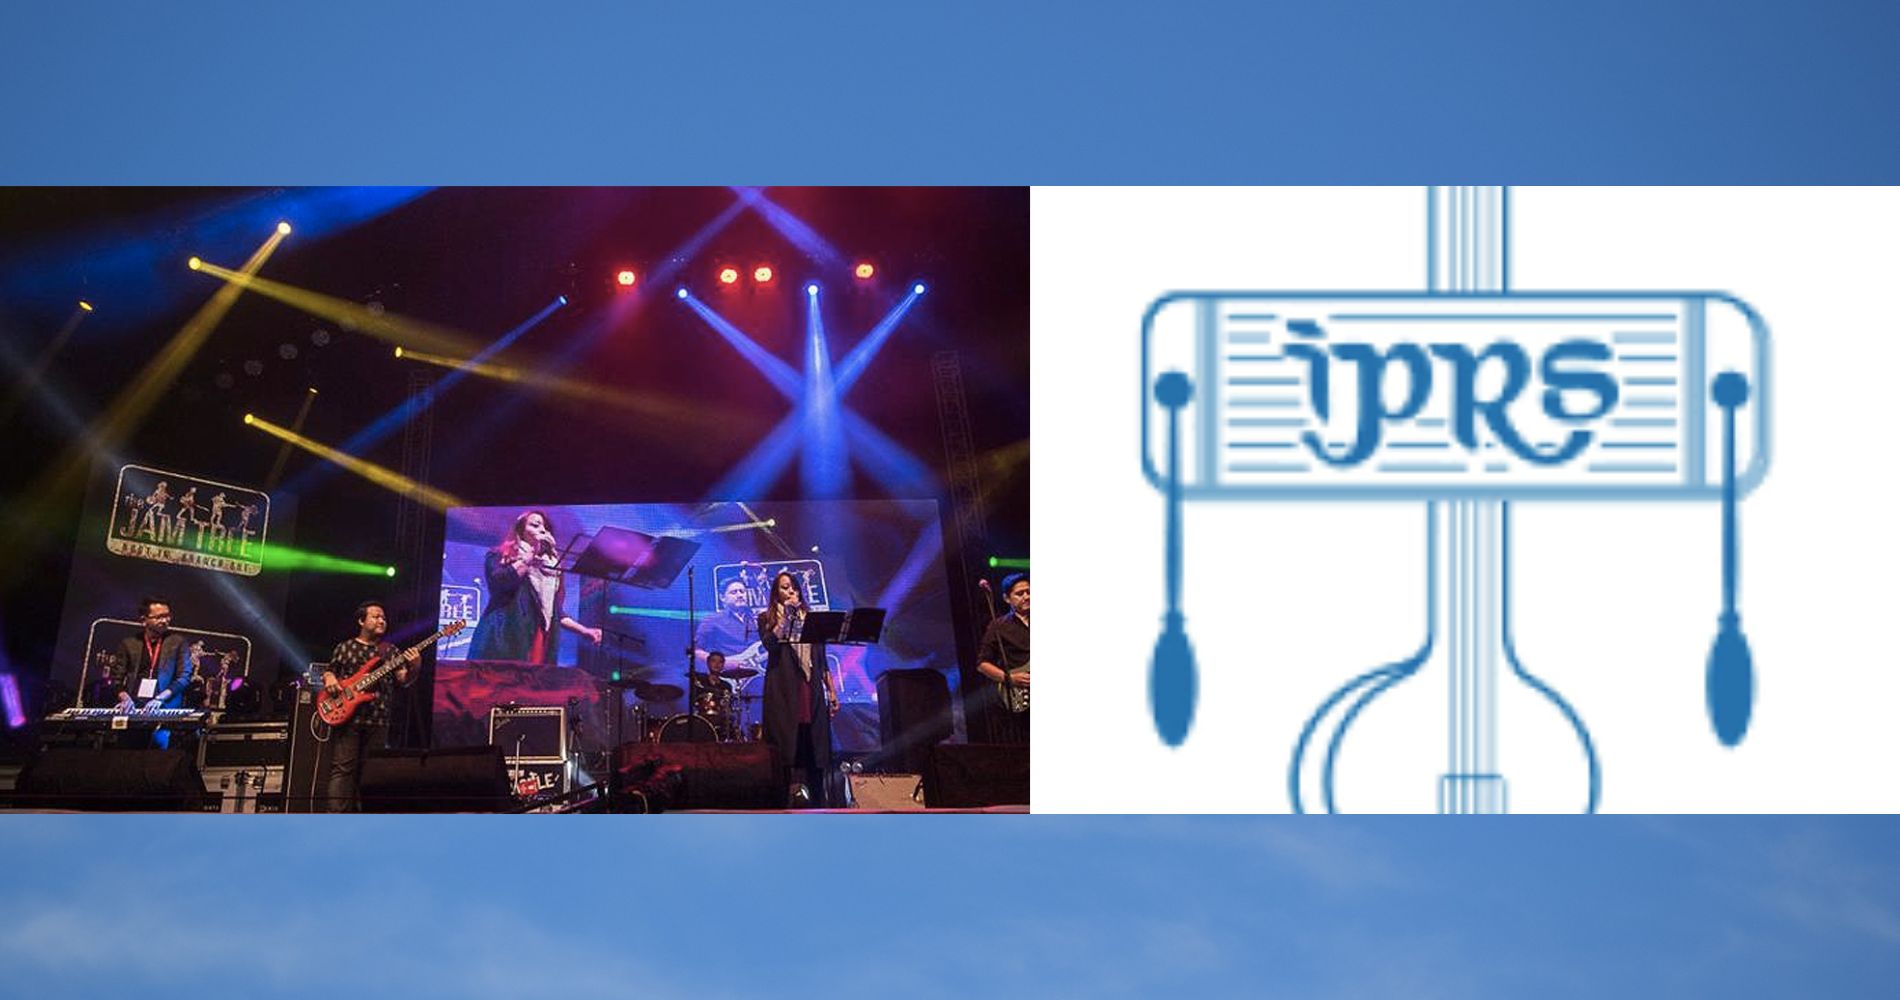 IPRS partners with the Hornbill Music Festival 2022 as the